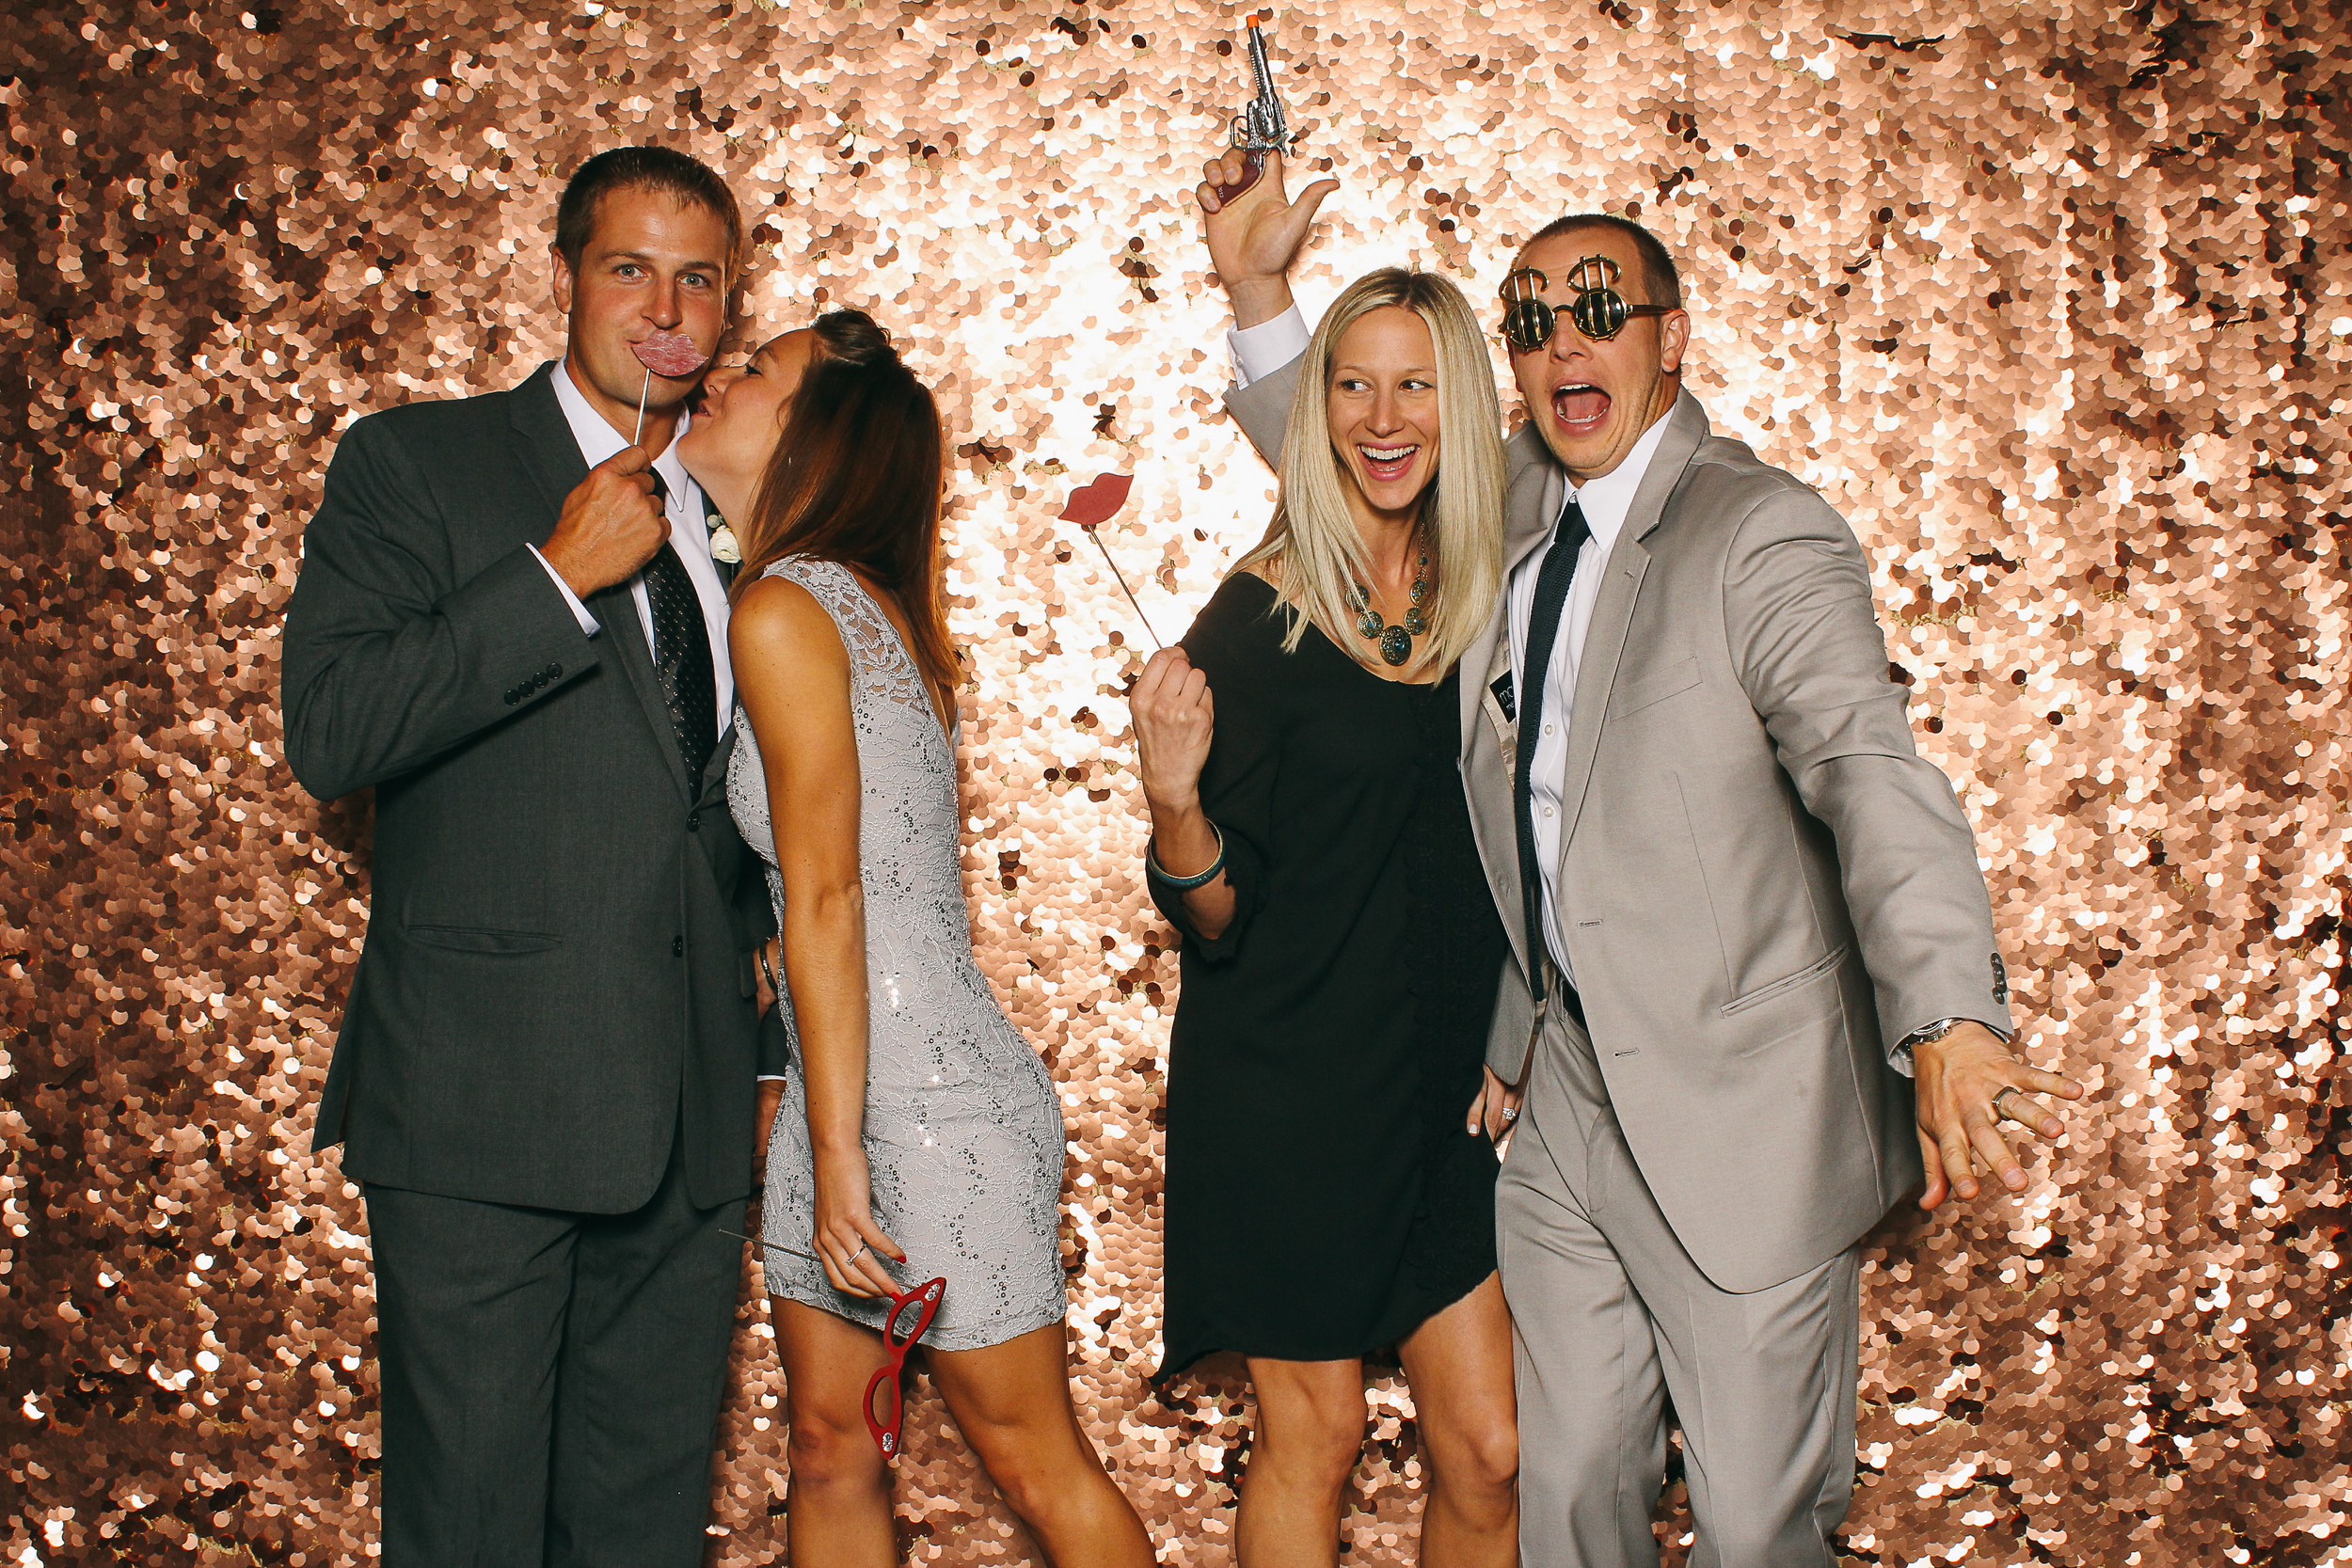 00191-Youngstown Wedding Photobooth Rental Kelly and Nick-20140913.jpg